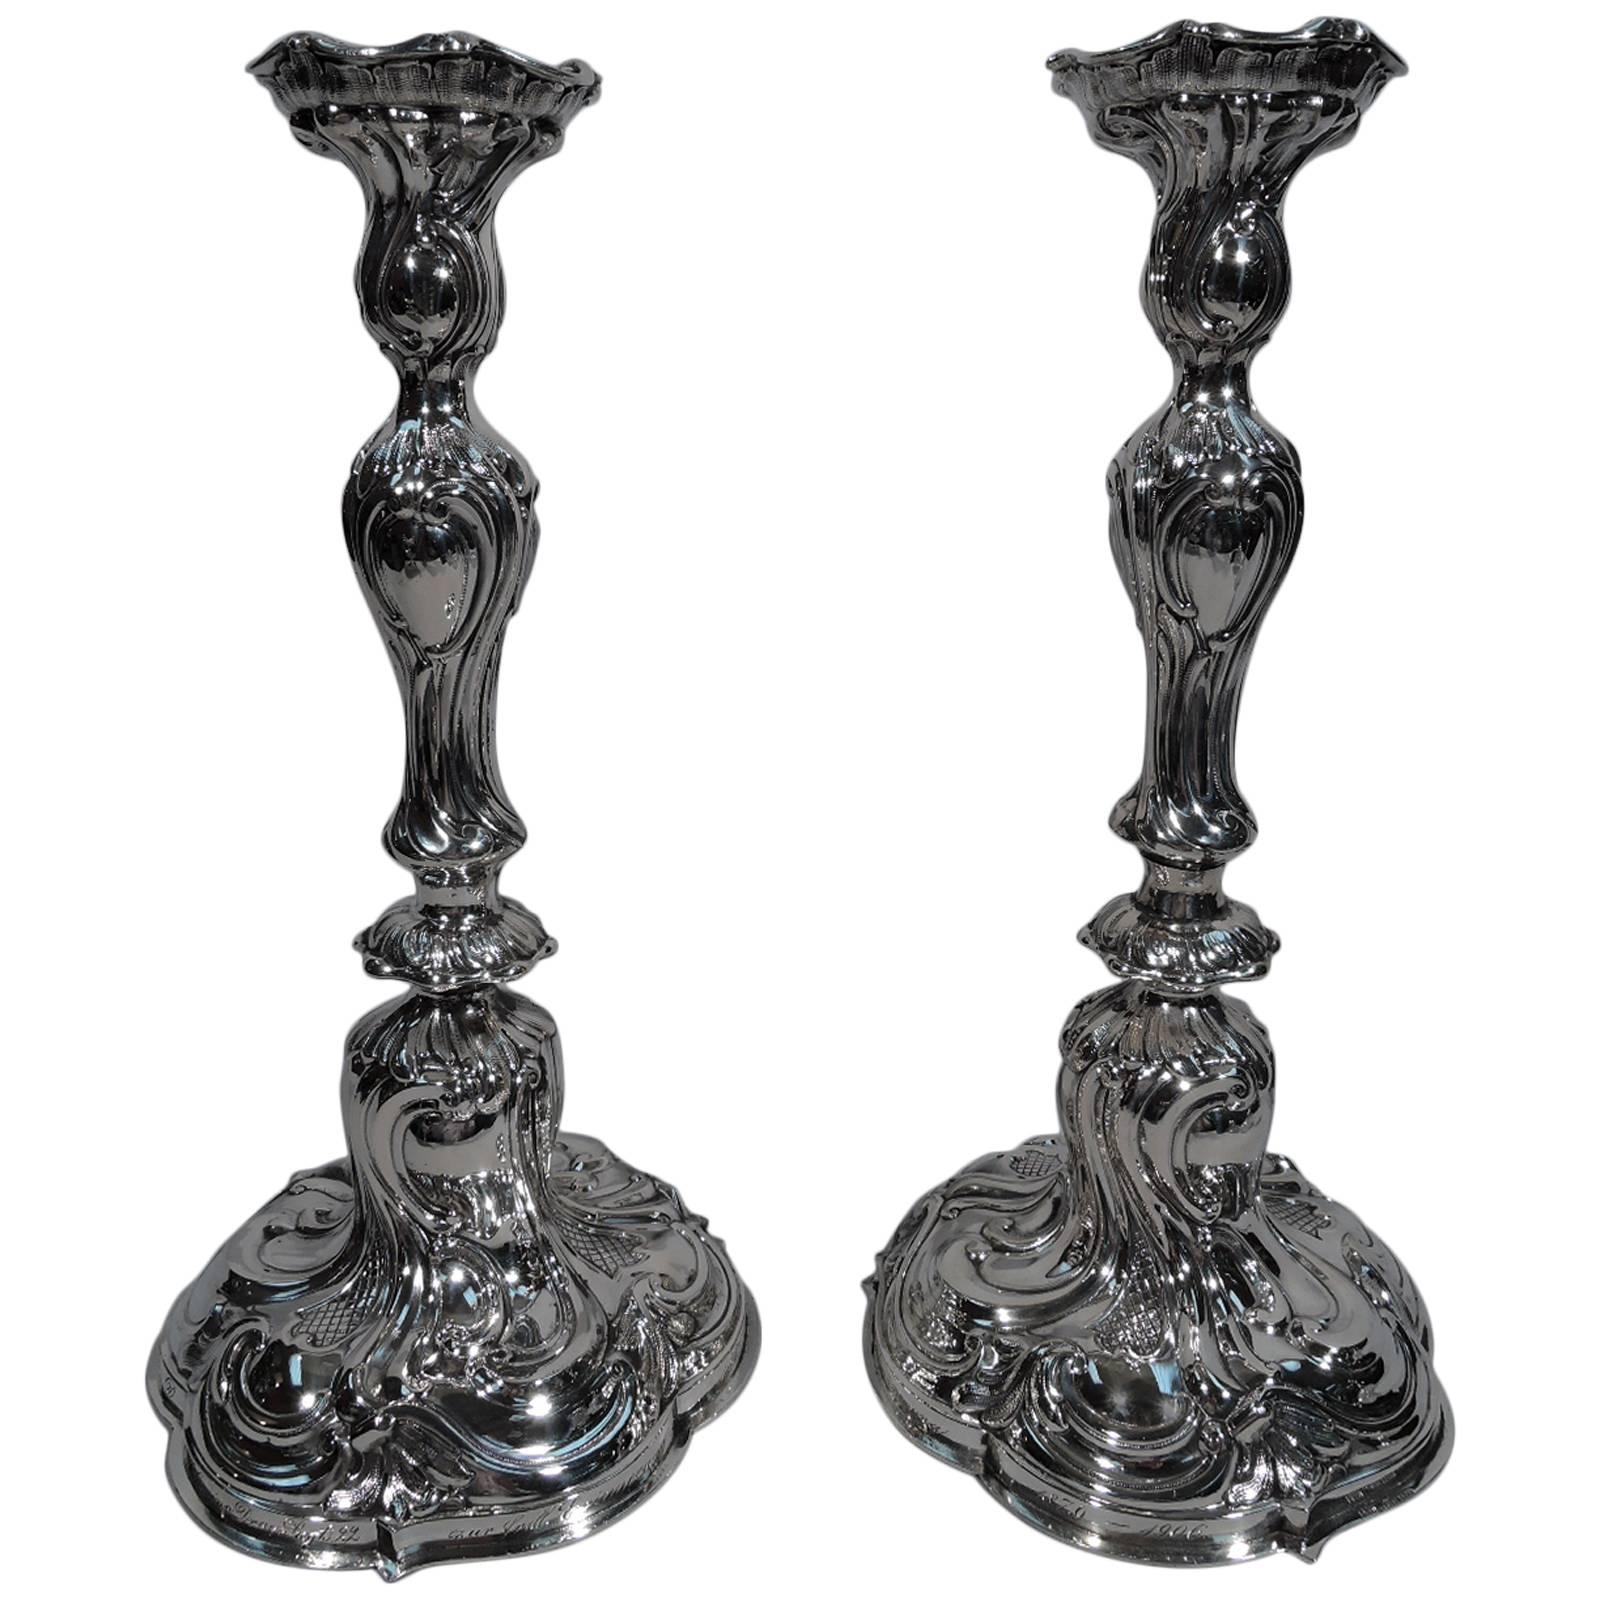 Pair of Tall Antique German Rococo Silver Candlesticks